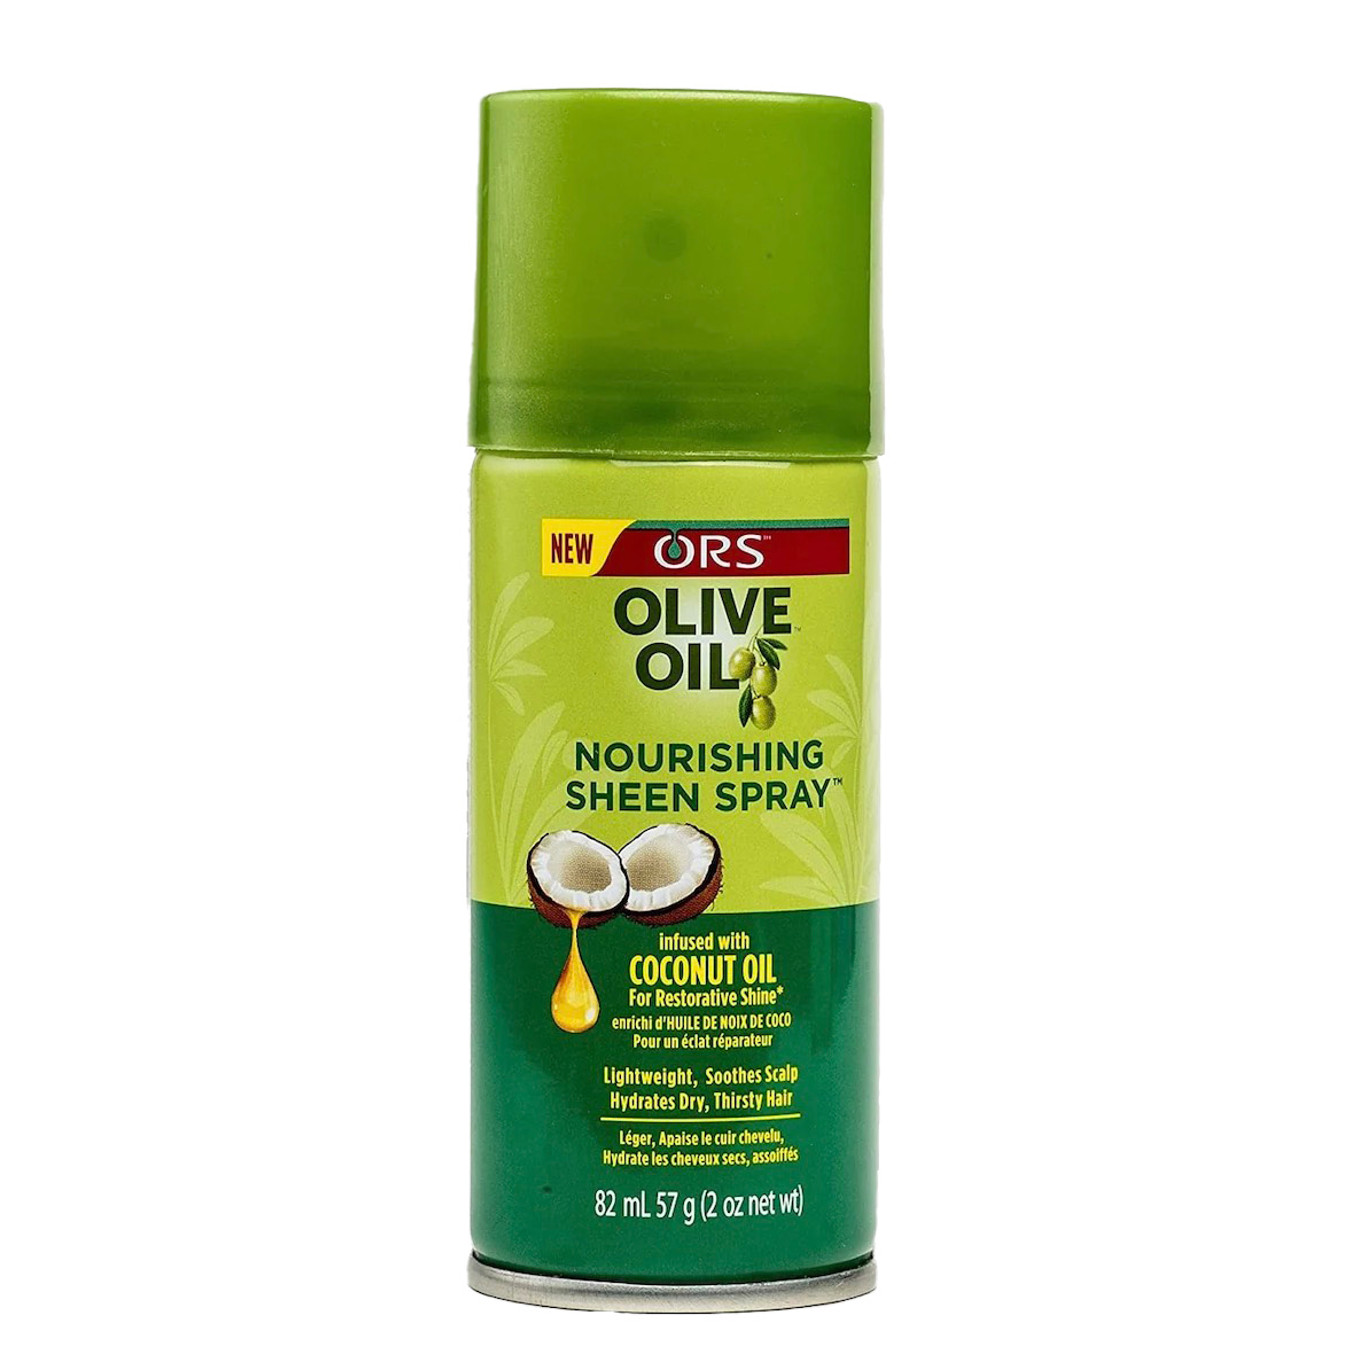 ORS Olive Oil Nourishing Sheen Spray with Coconut Oil (2 oz)